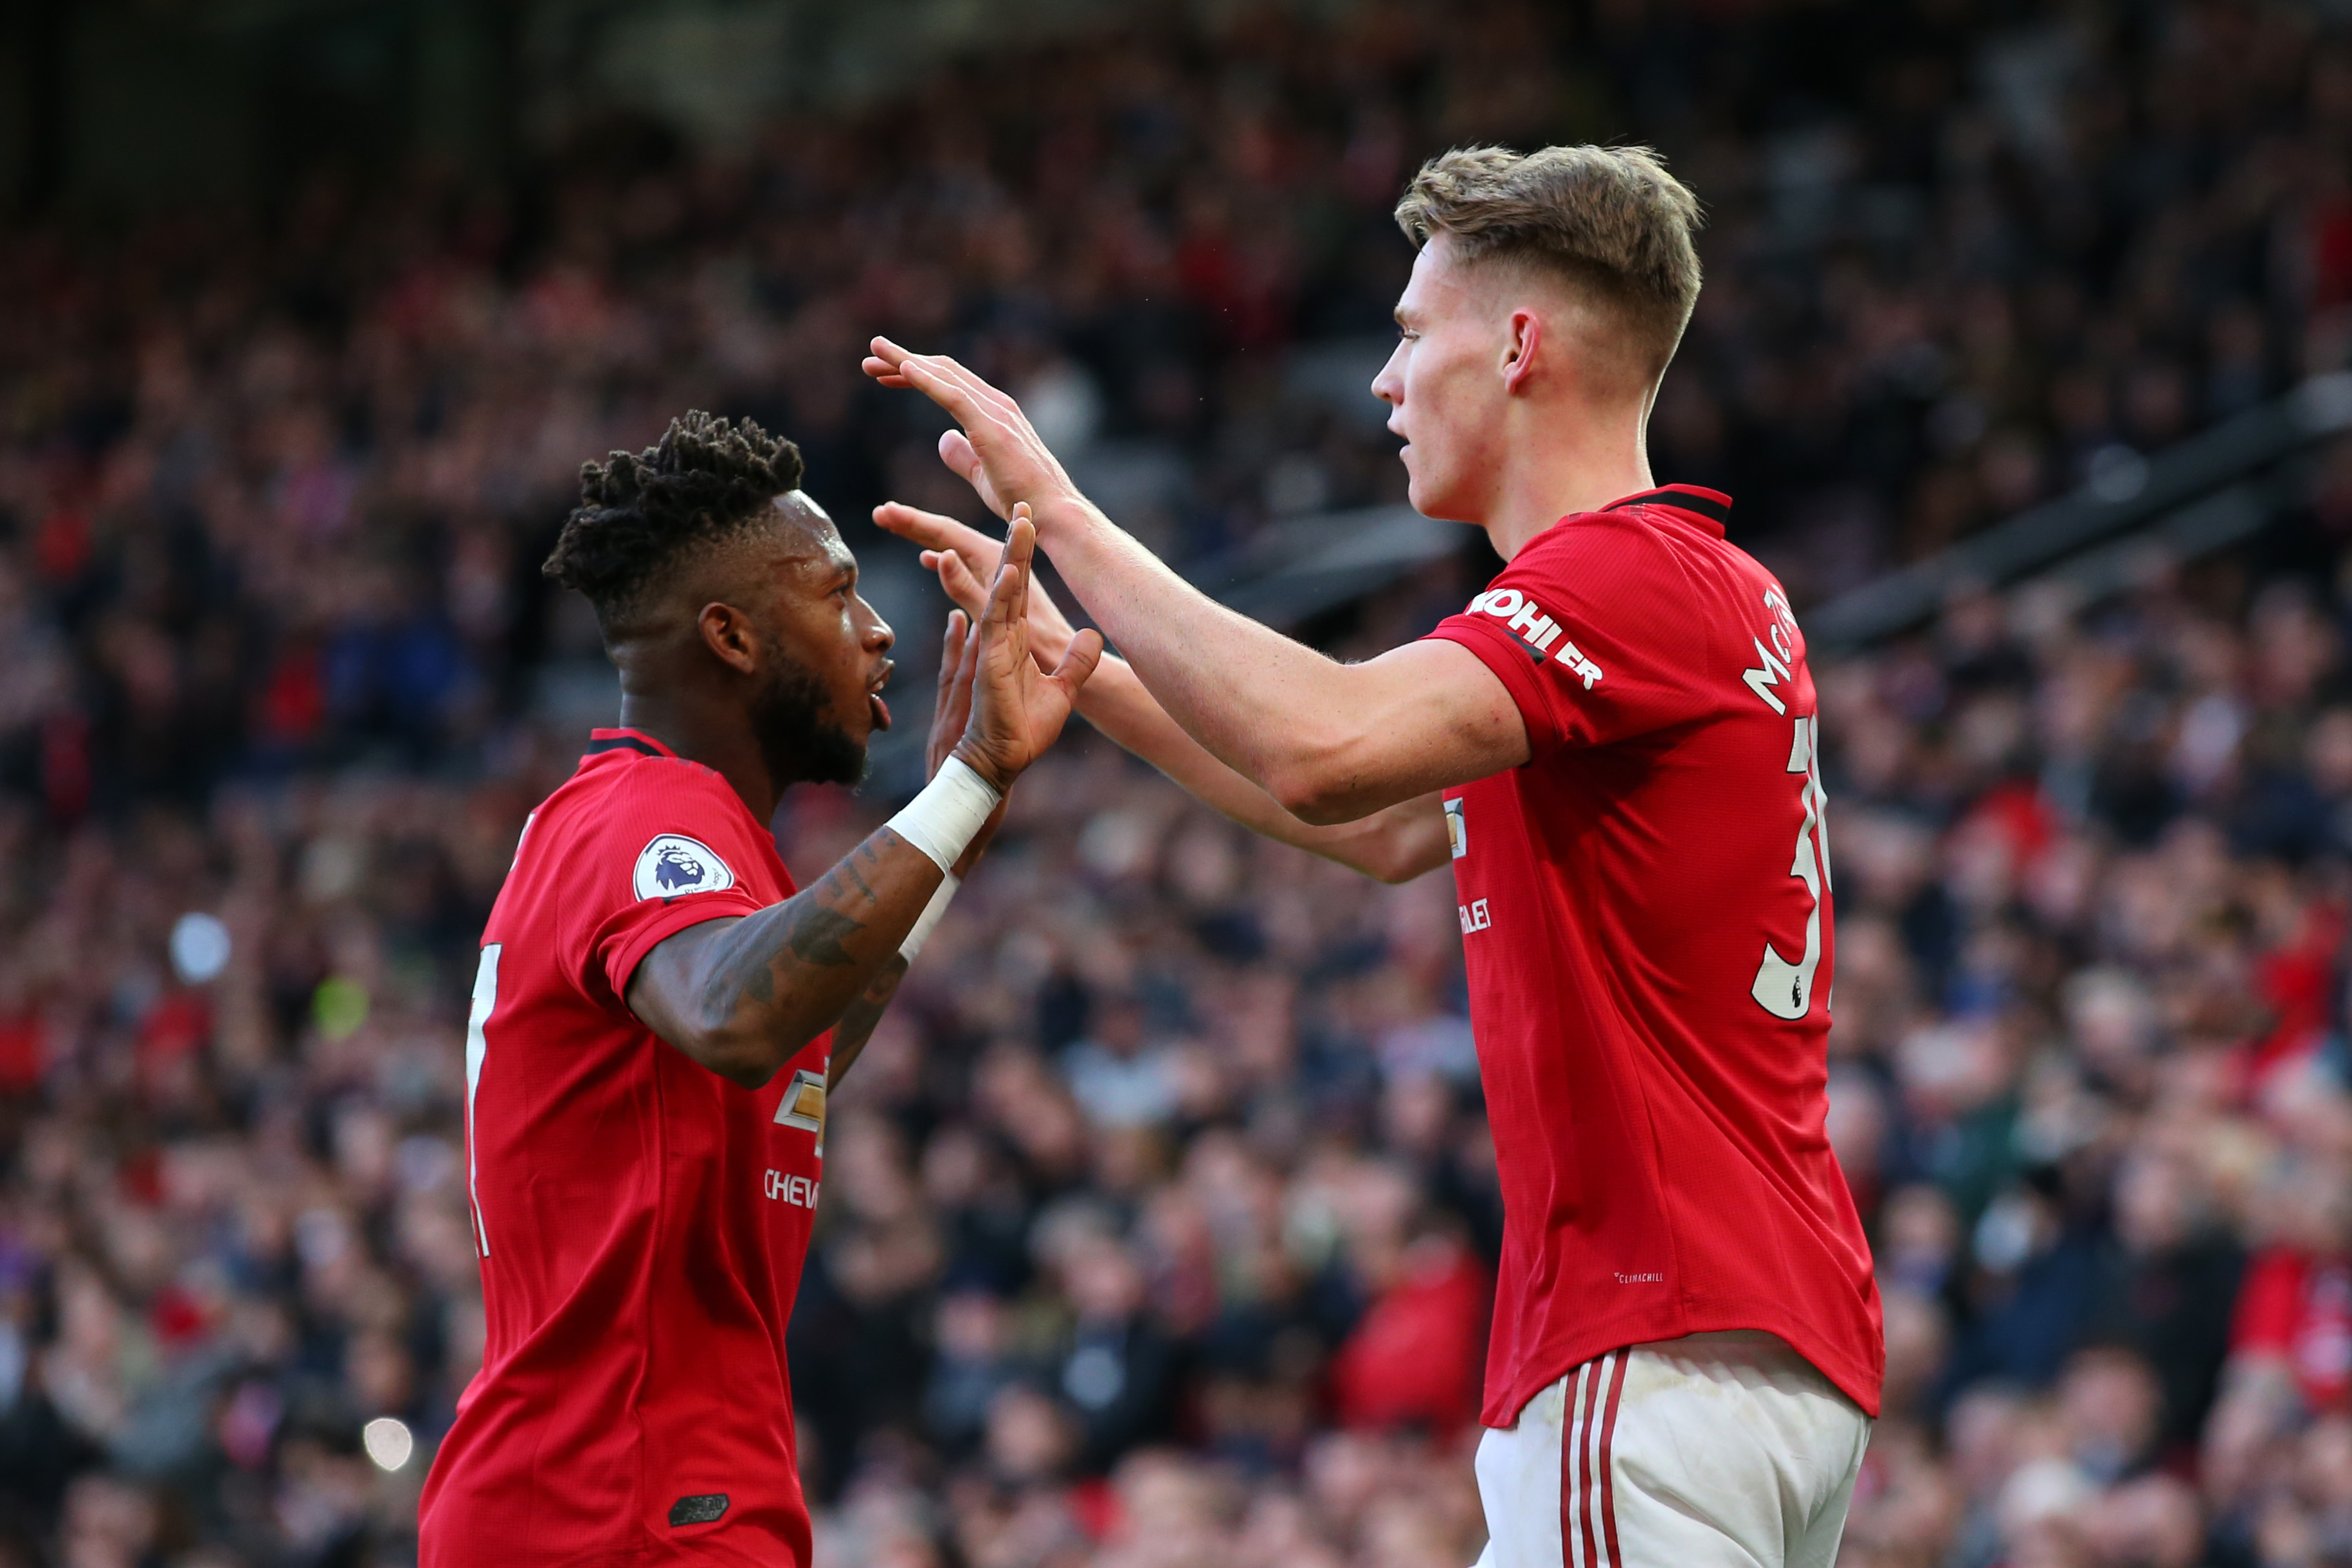 Neither McTominay nor Fred has what it takes to displace Matic, on their own. (Photo by Alex Livesey/Getty Images)